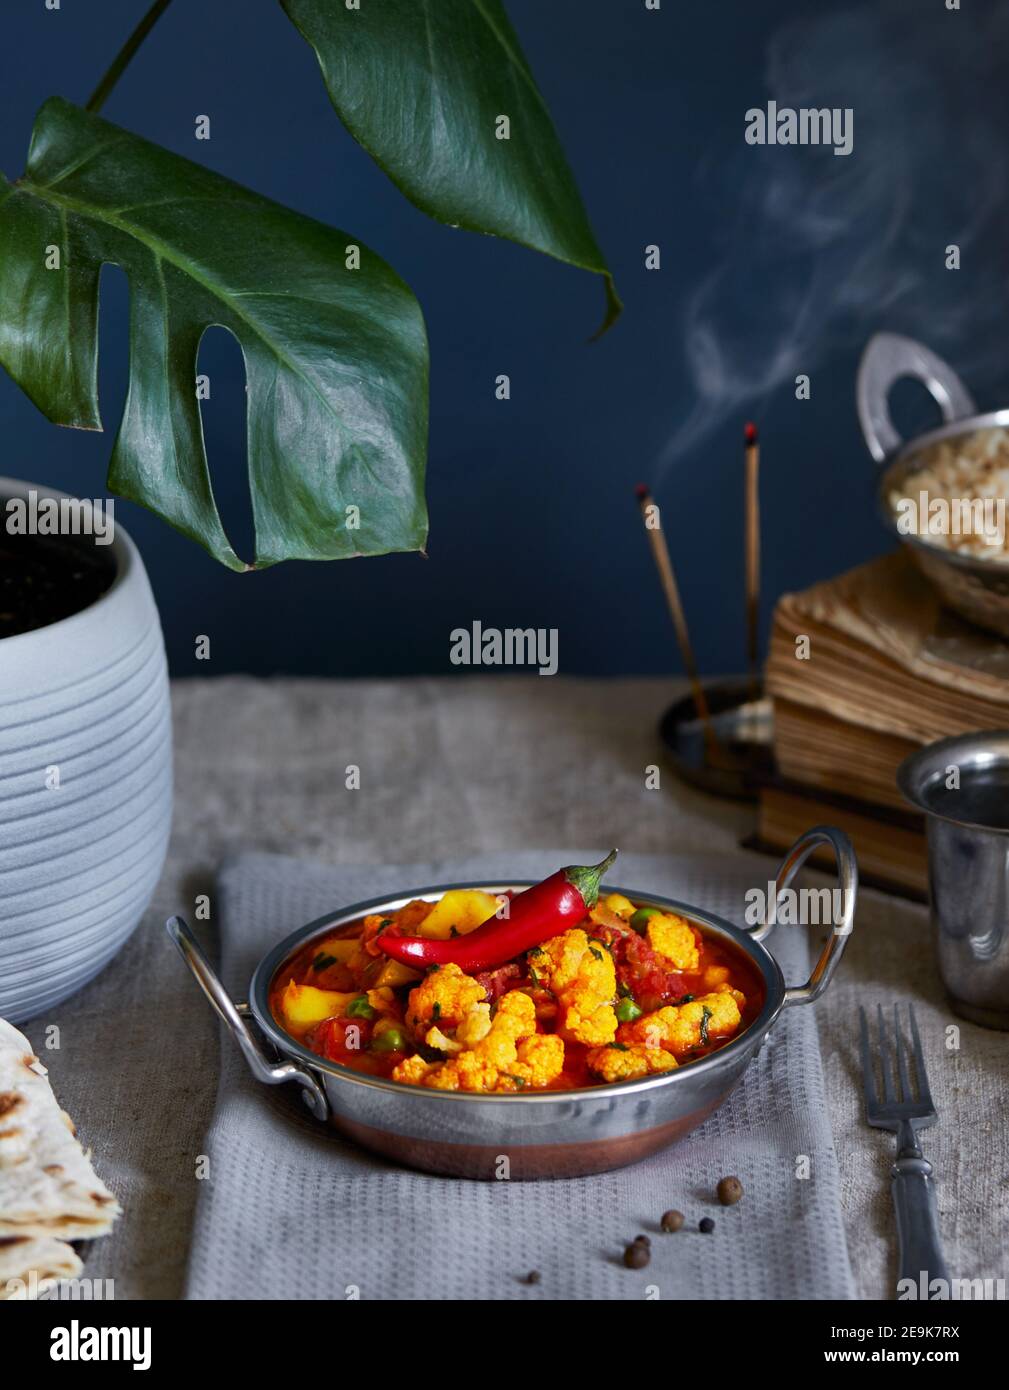 Aloo gobi traditional Indian food from cauliflower and potato decorated with red chili served with brown rice, lemon water and chapati on the table Stock Photo